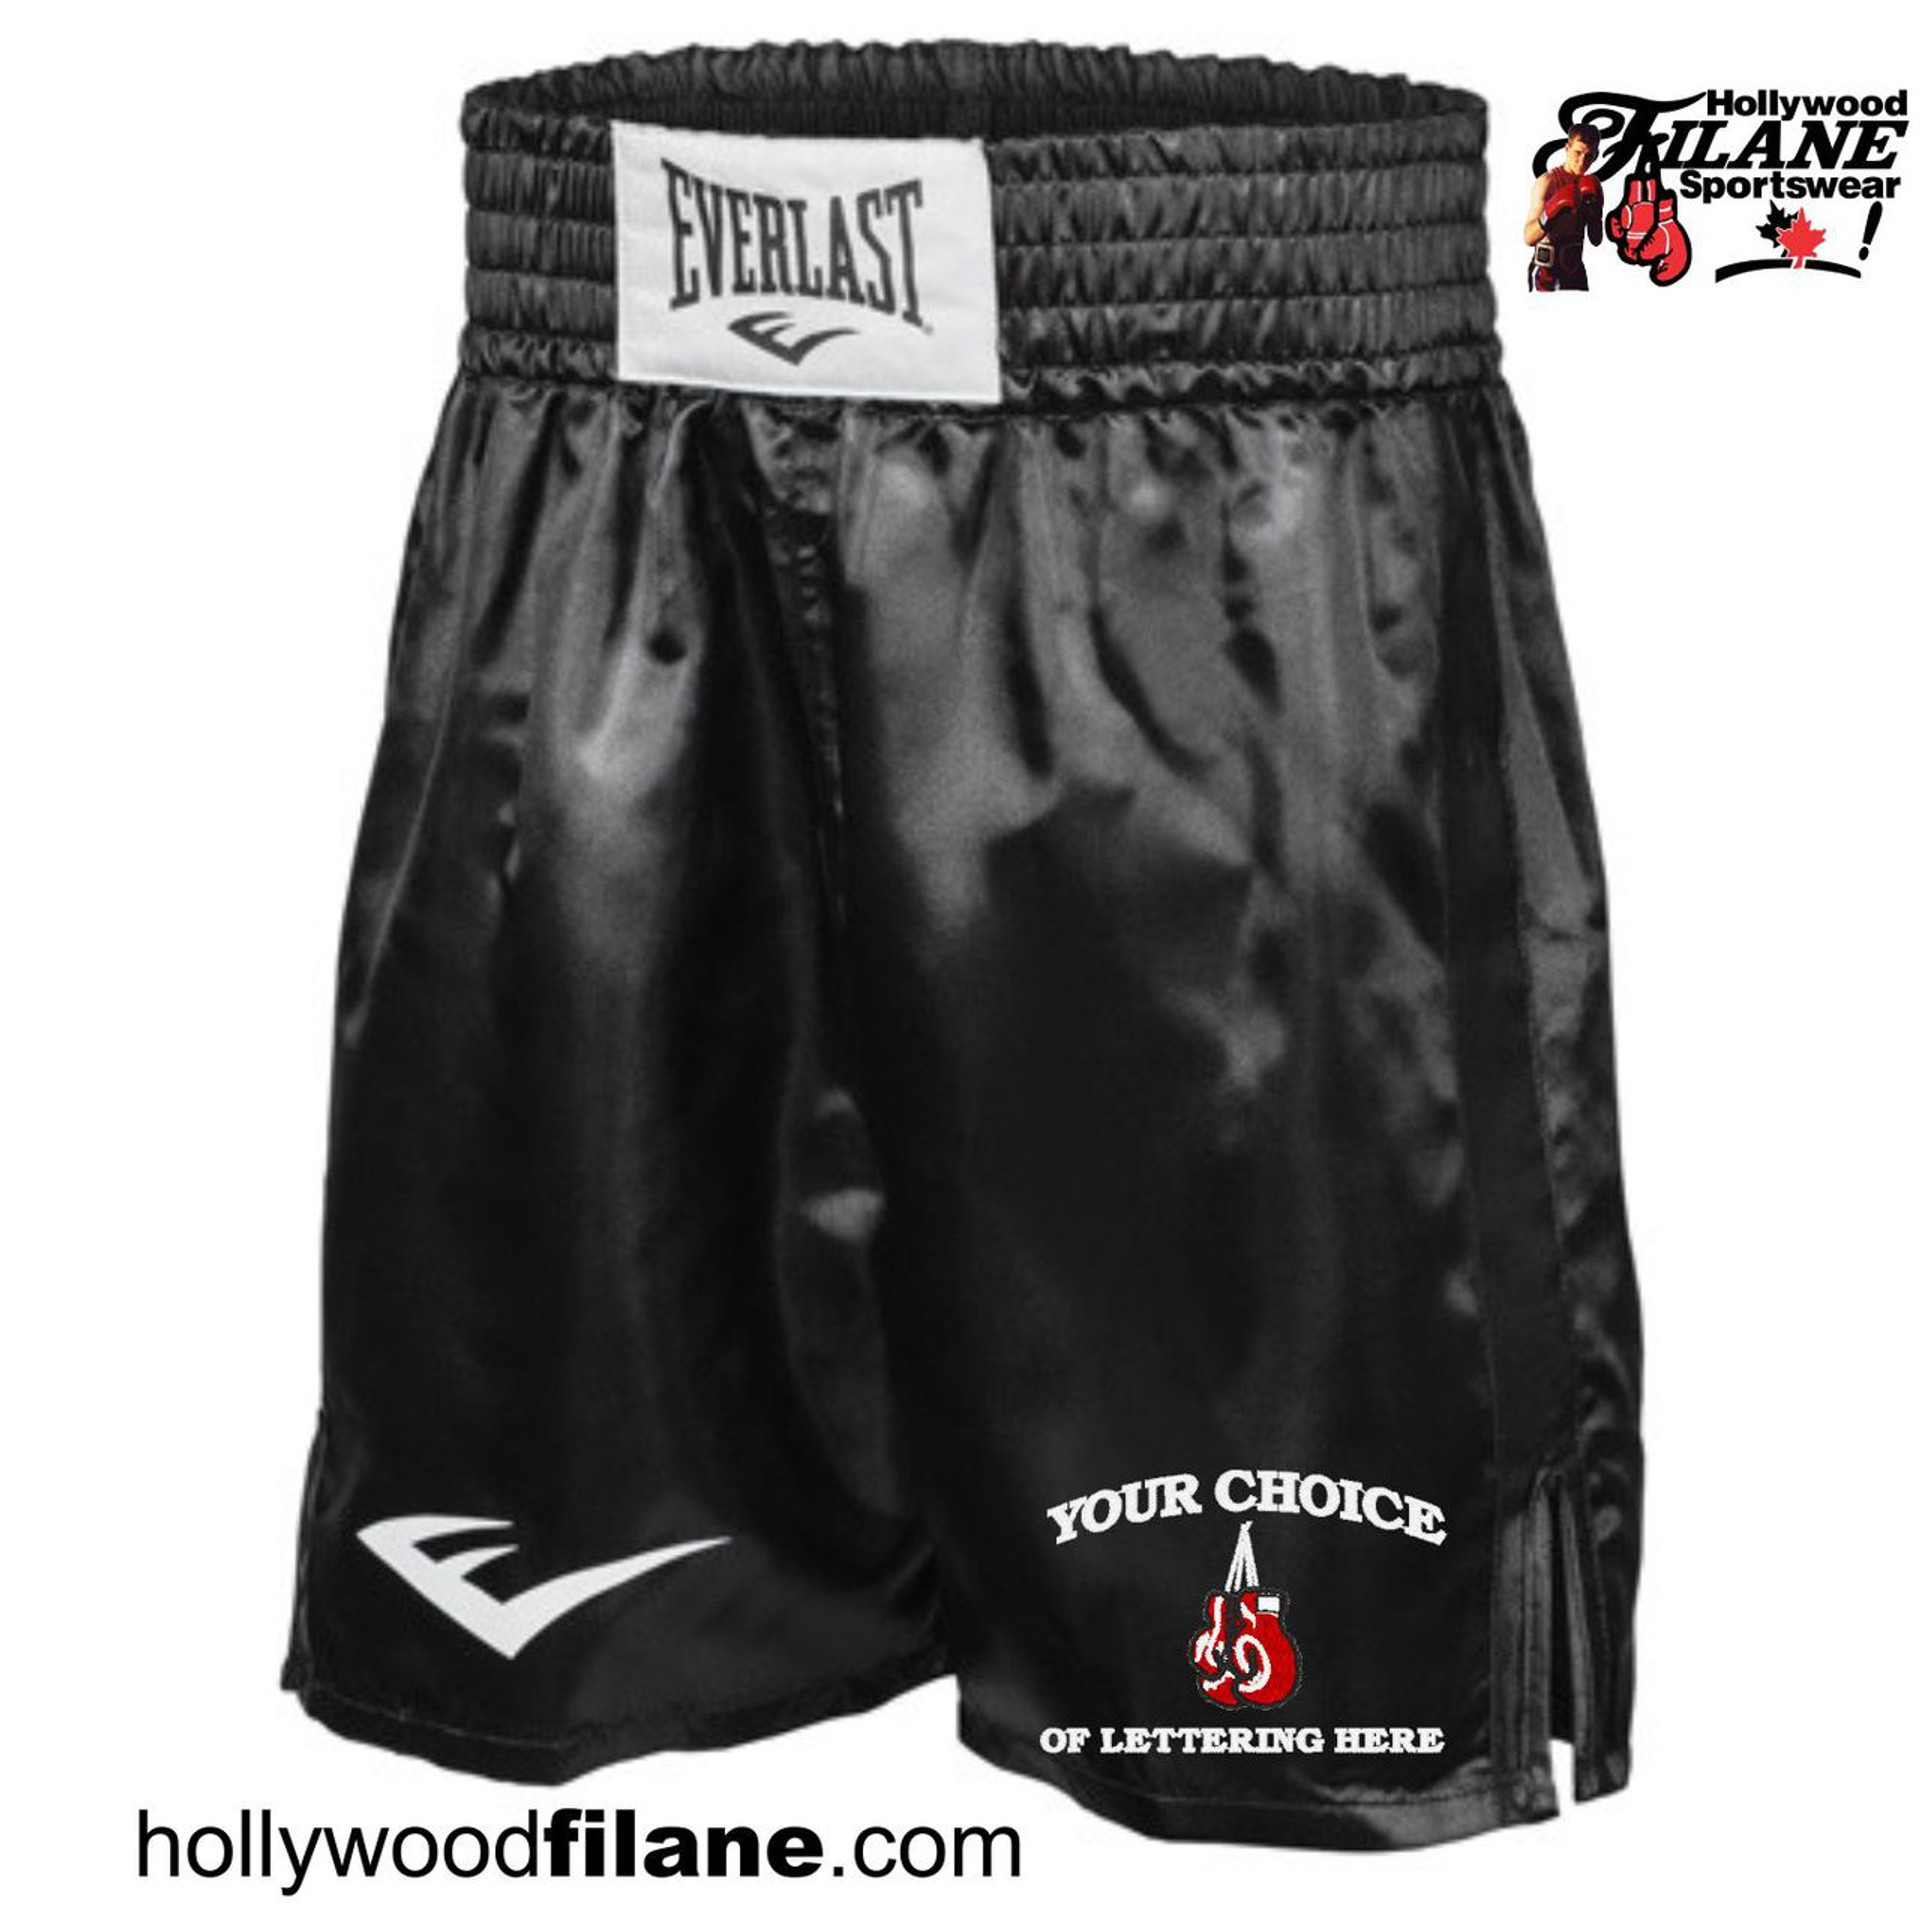 Personalized Everlast Boxing Trunks Custom Embroidered - Hollywood Filane